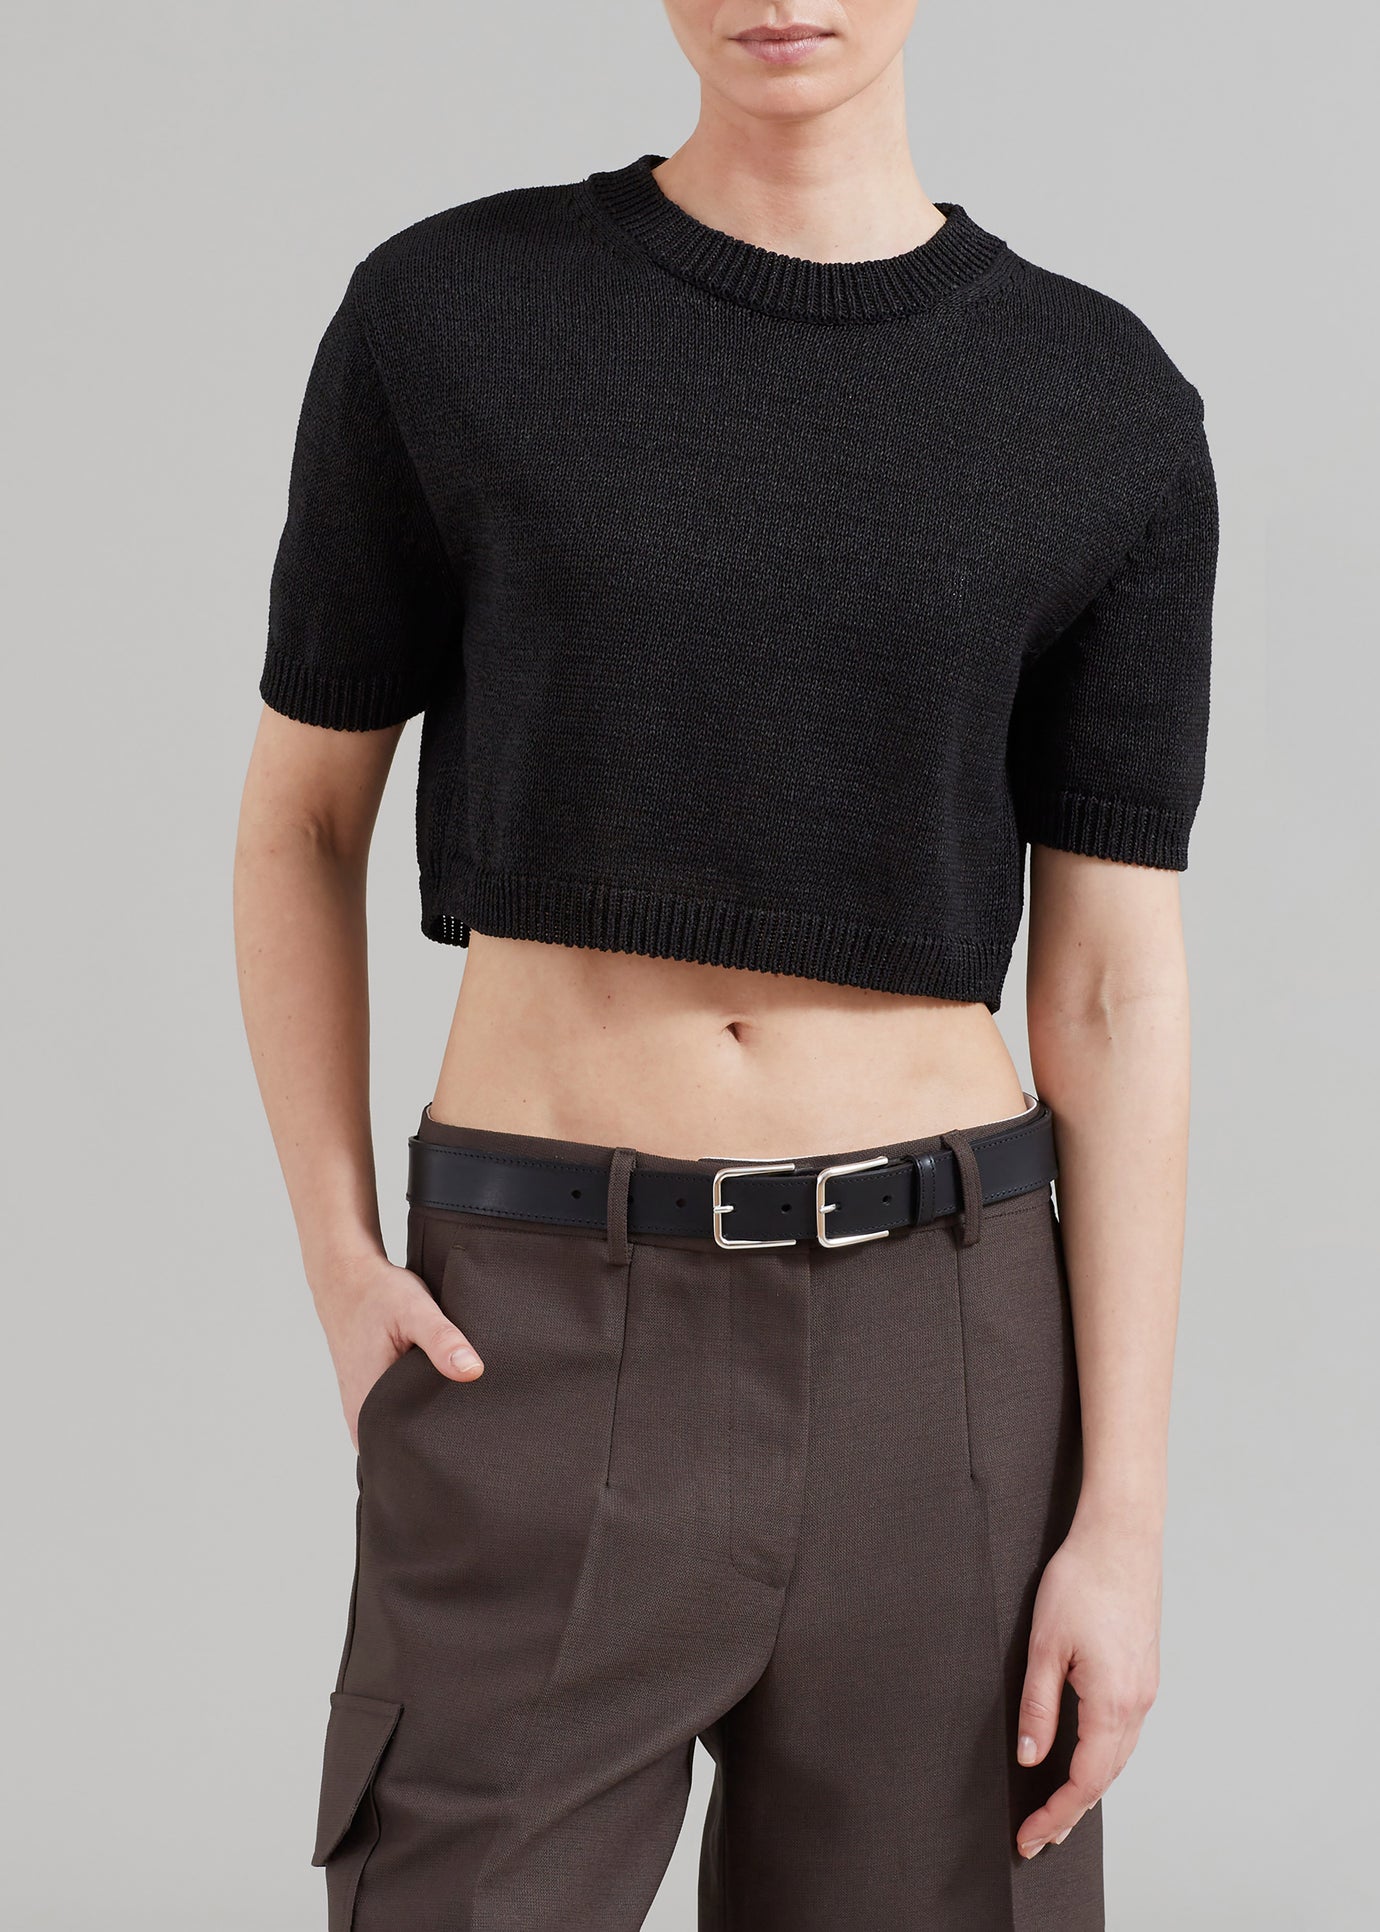 Holly Cropped Knit Top - Black - 1